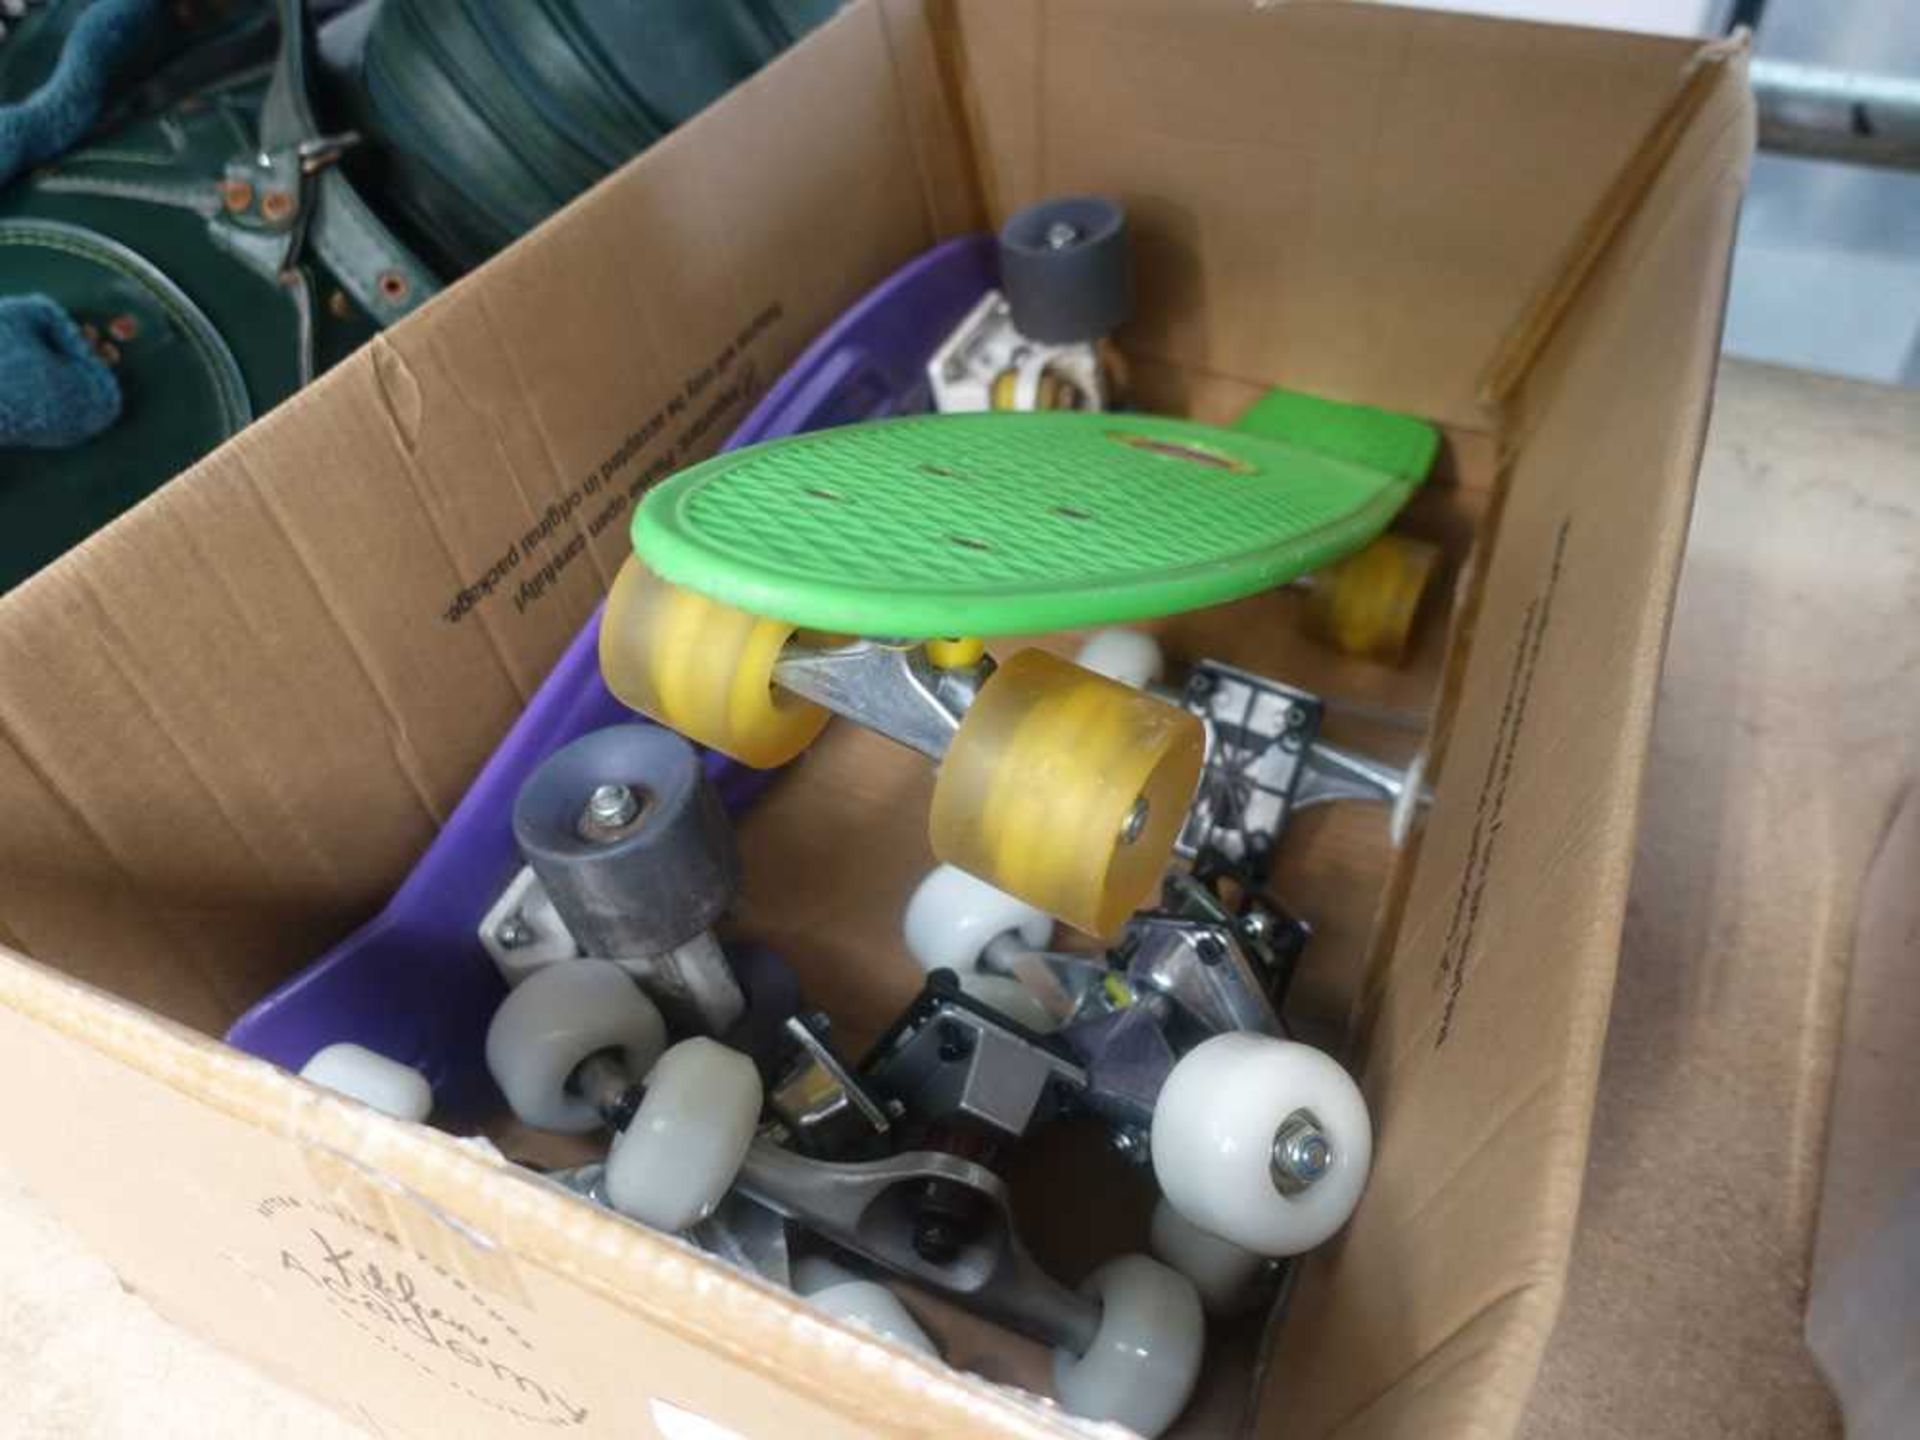 2 plastic skateboards and quantity of skateboard wheels